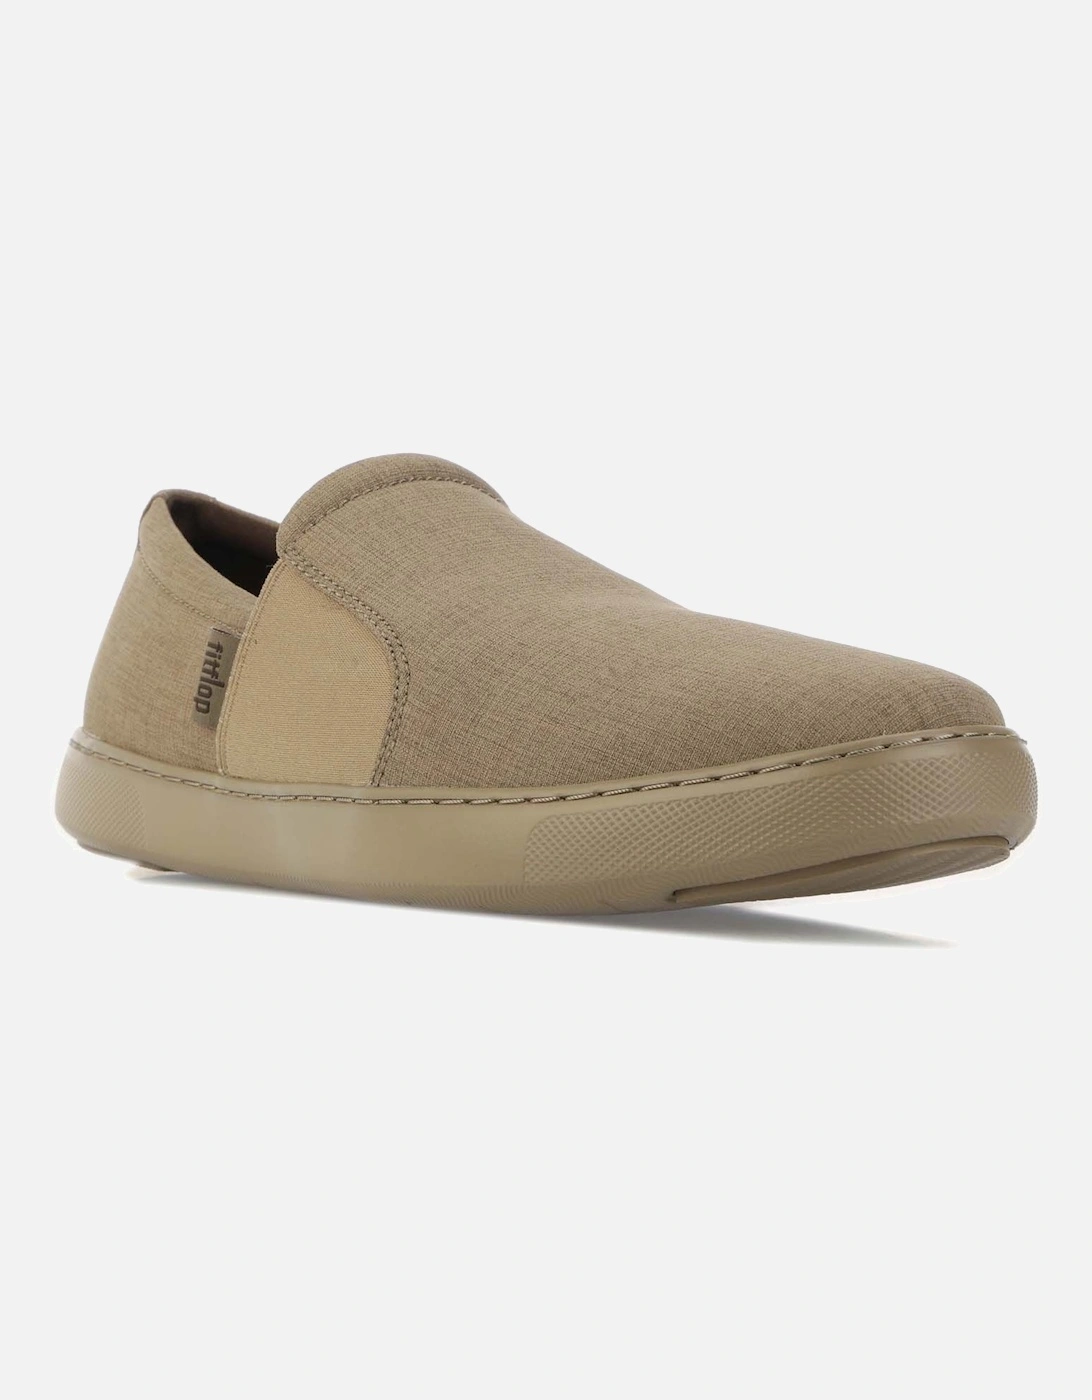 Mens Collins Soft Canvas Slip On Loafers